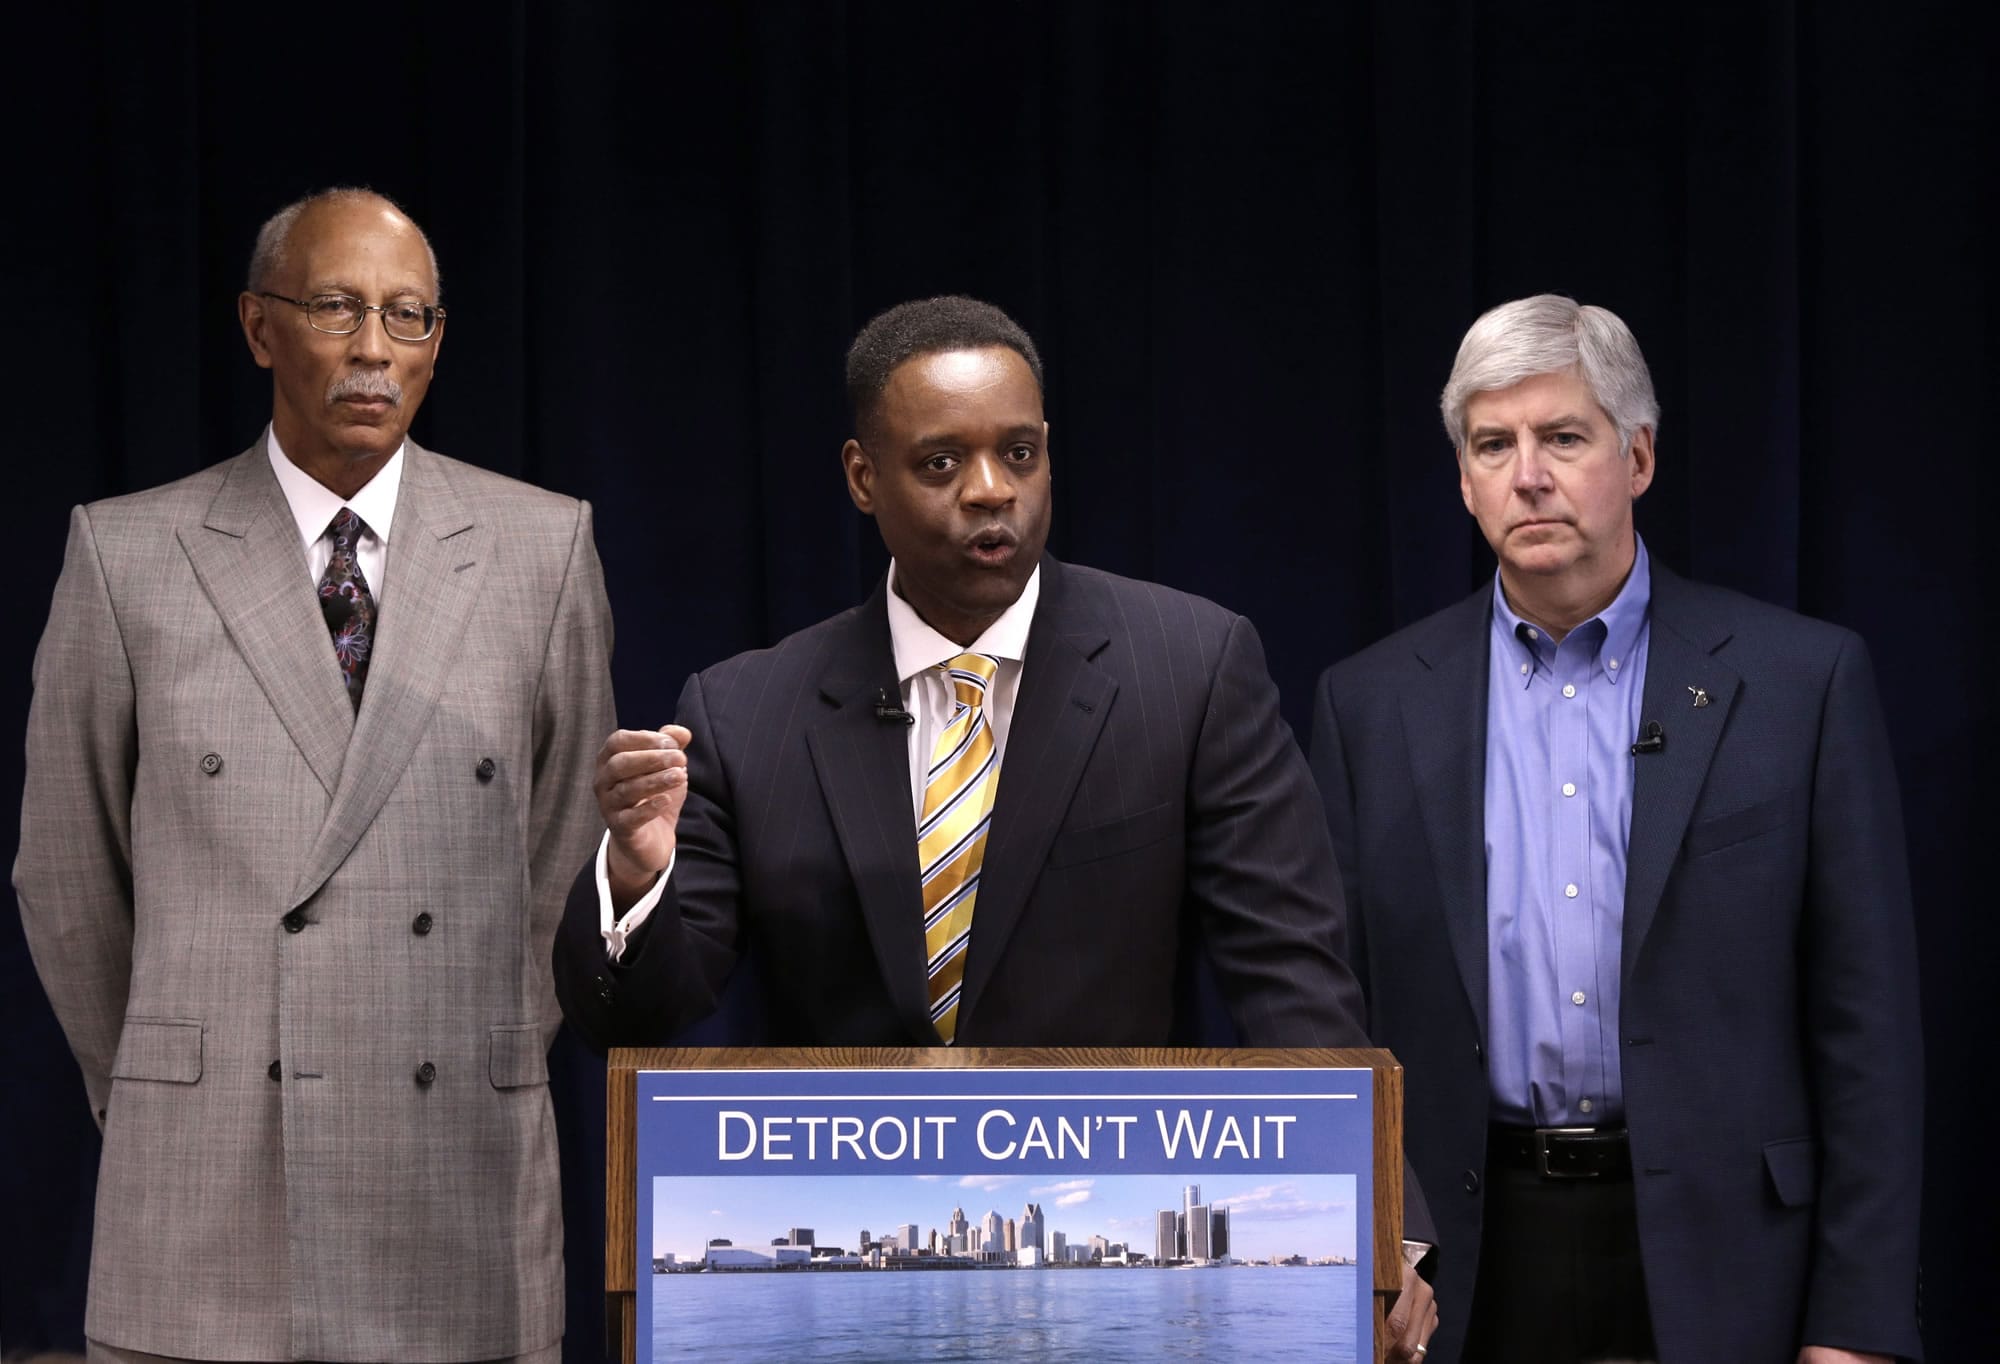 Kevyn Orr, center, speaks at a news conference as Detroit Mayor Dave Bing, left, and Gov. Rick Snyder listen in Detroit on Thursday. Snyder announced that he had chosen Orr, a partner in the Cleveland-based law and restructuring Jones Day firm, as Detroit's emergency manager.